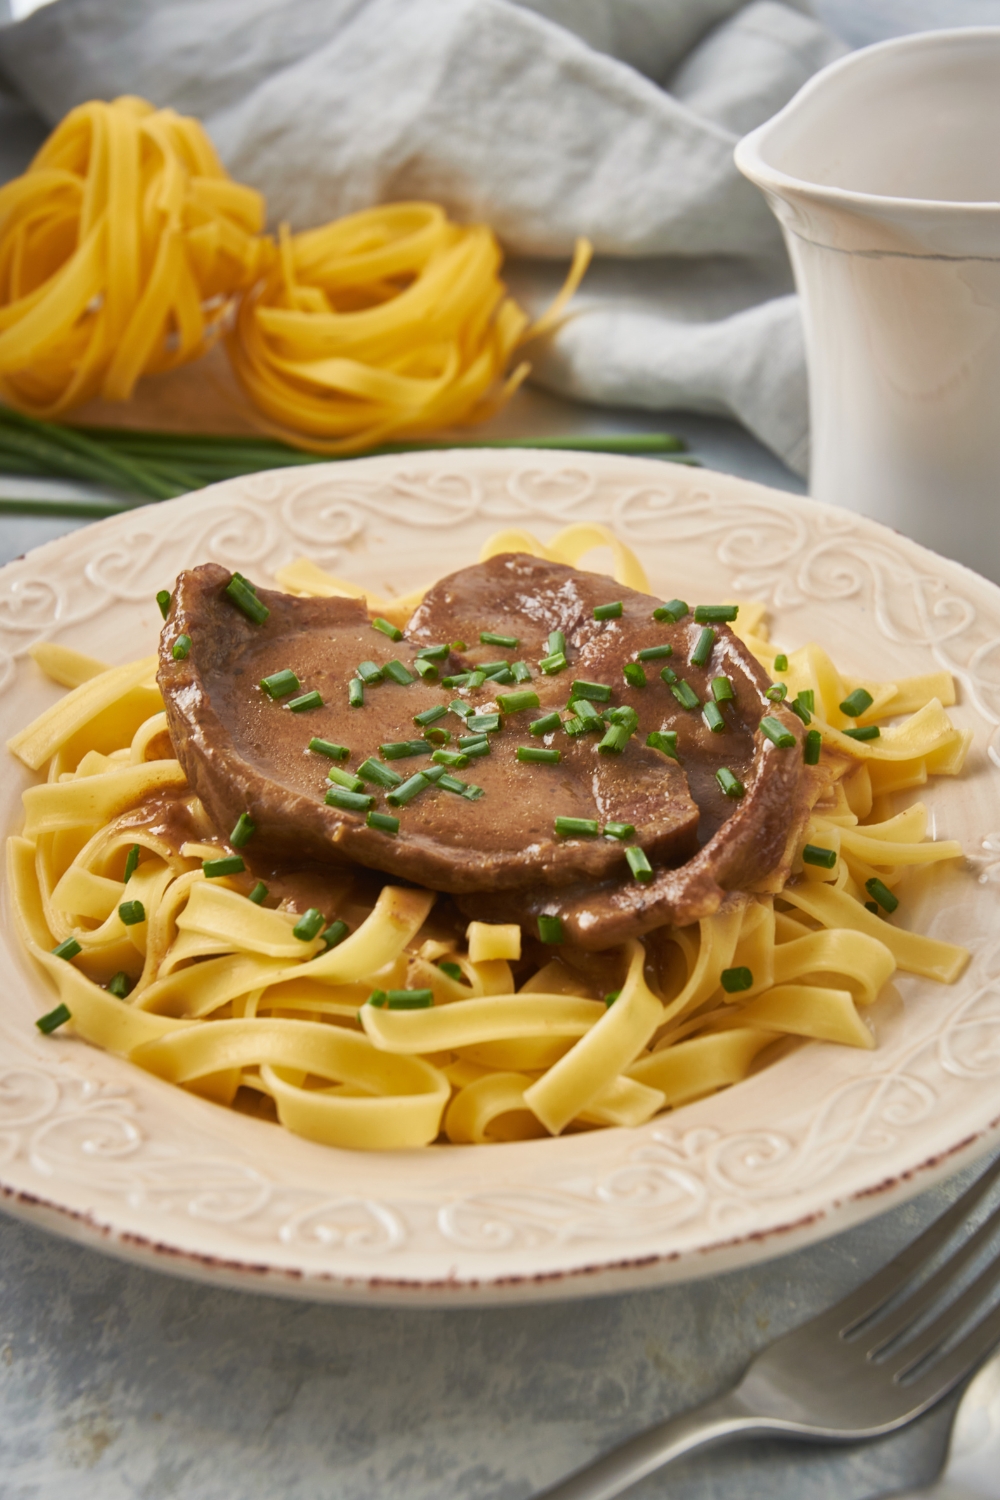 A cube steak covered in brown gravy garnished with sliced green onion and served on a bed of linguini noodles.